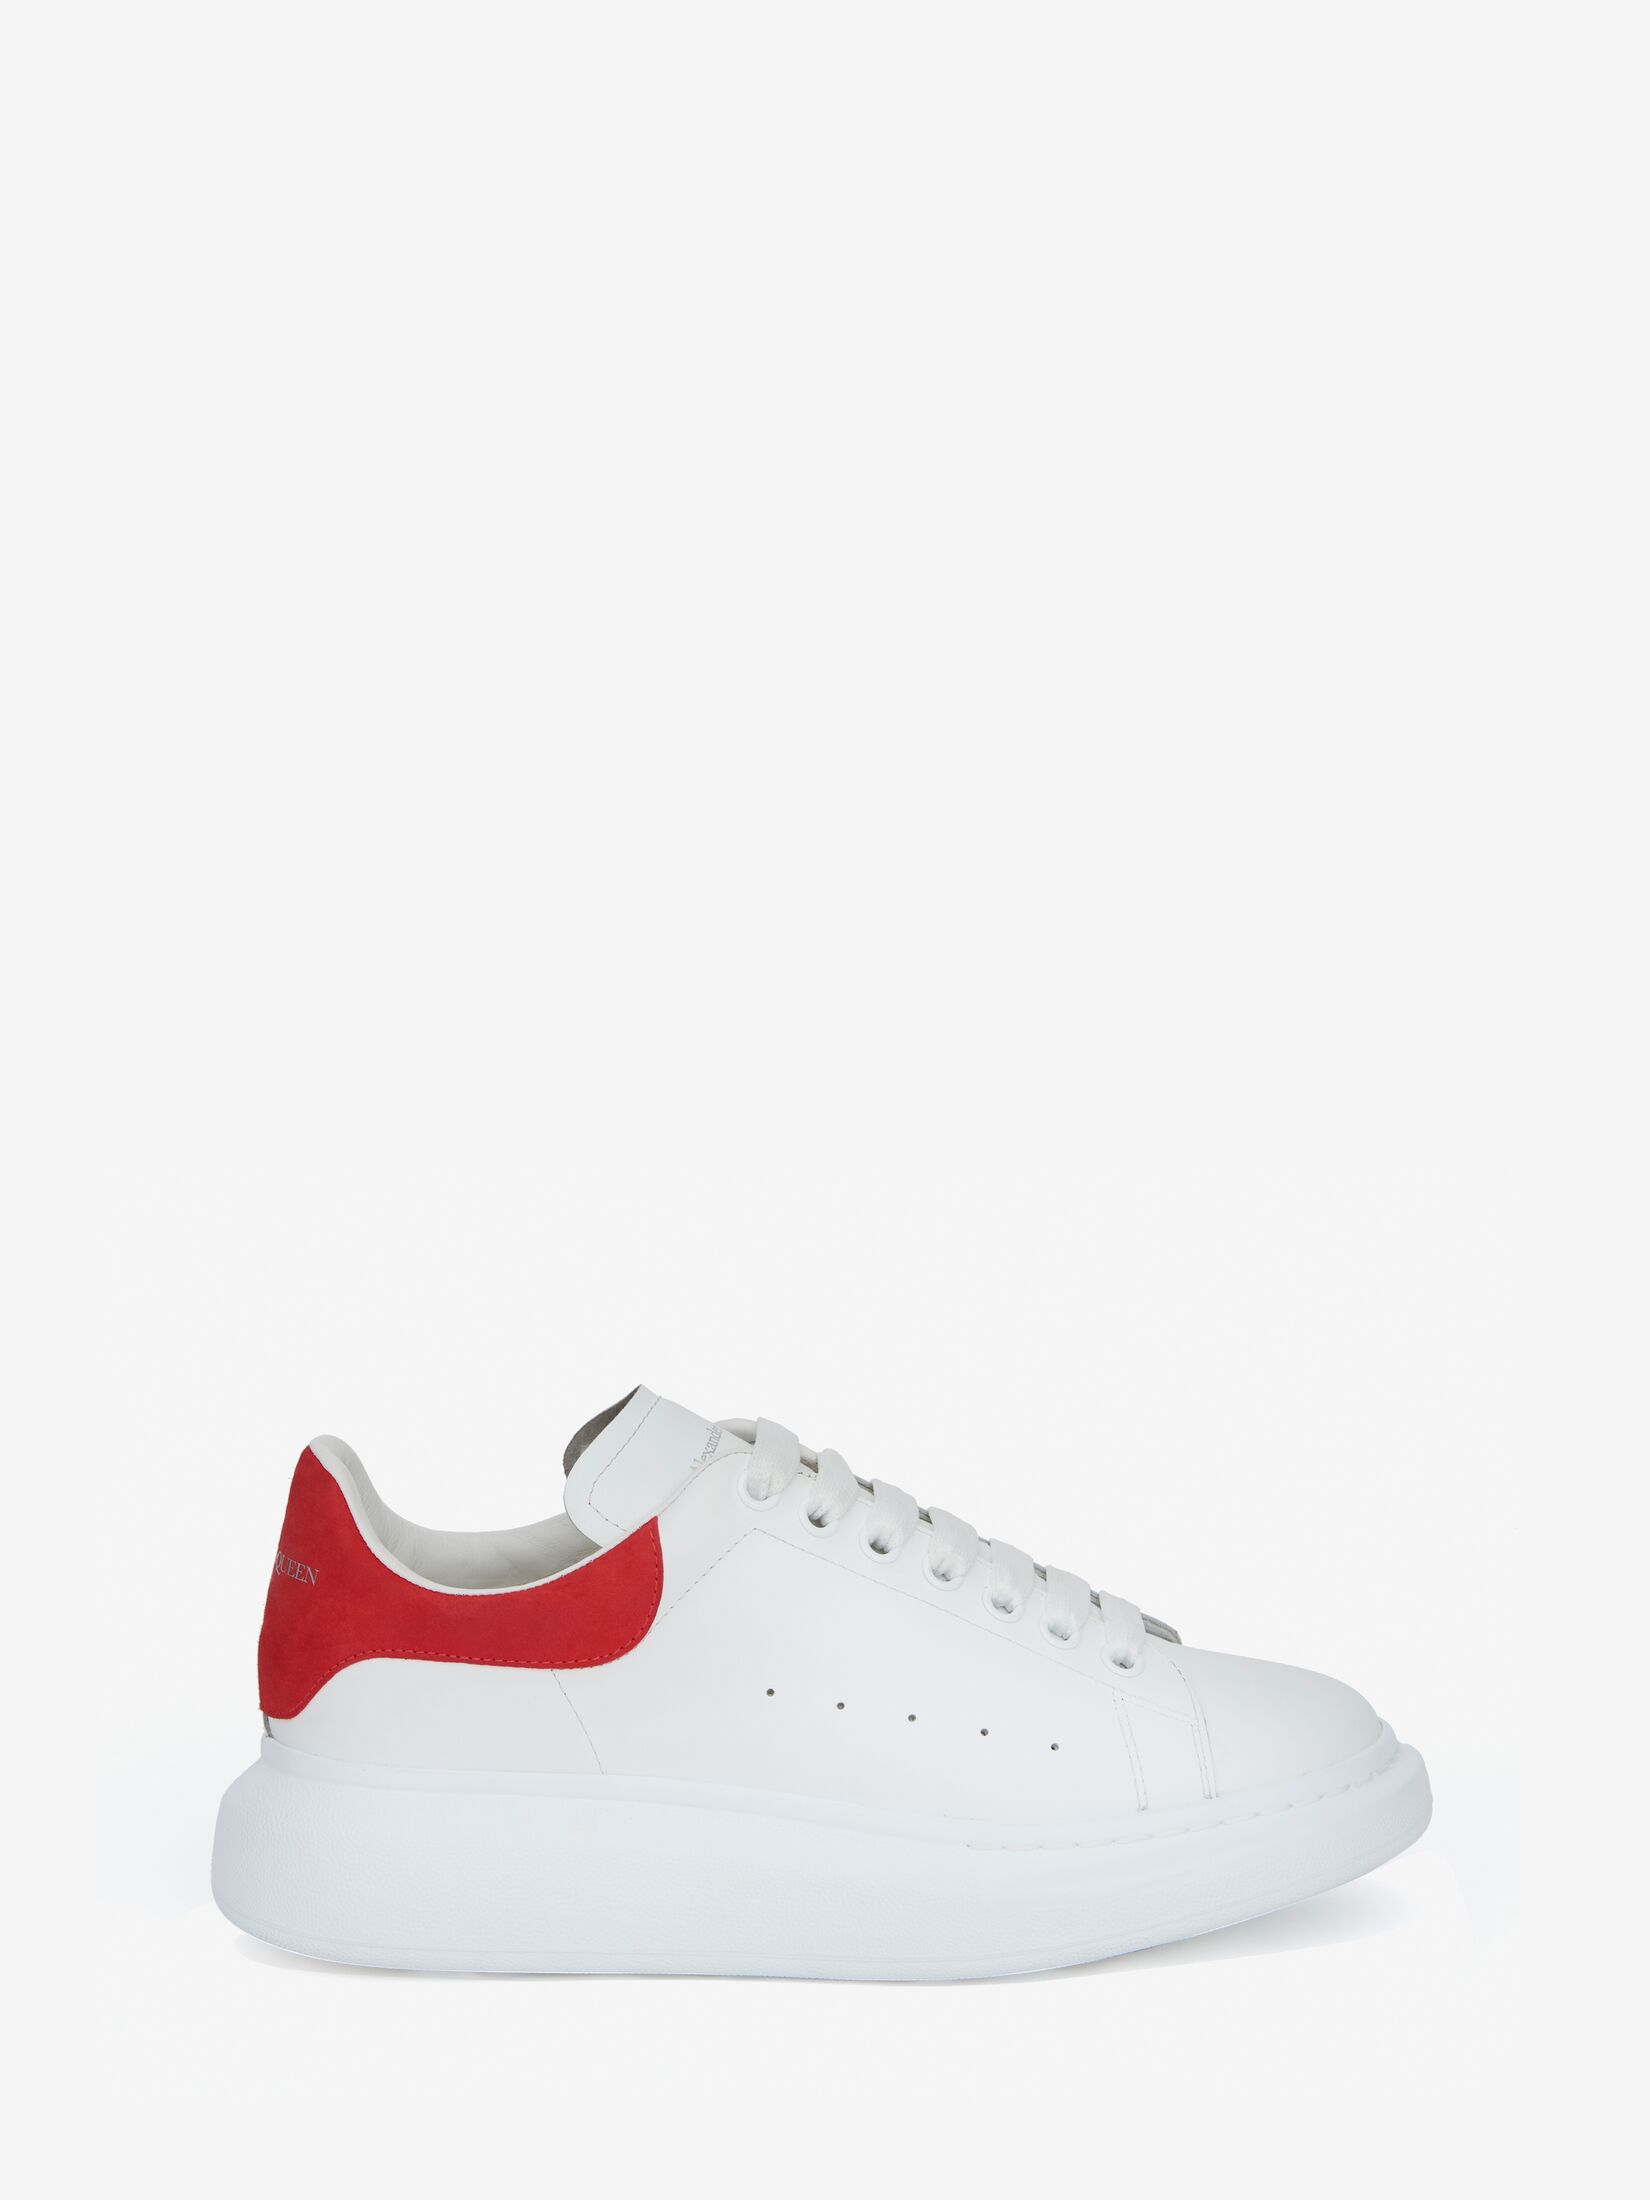 ALEXANDER MCQUEEN Sprint Runner embossed two-tone leather exaggerated-sole  sneakers | NET-A-PORTER